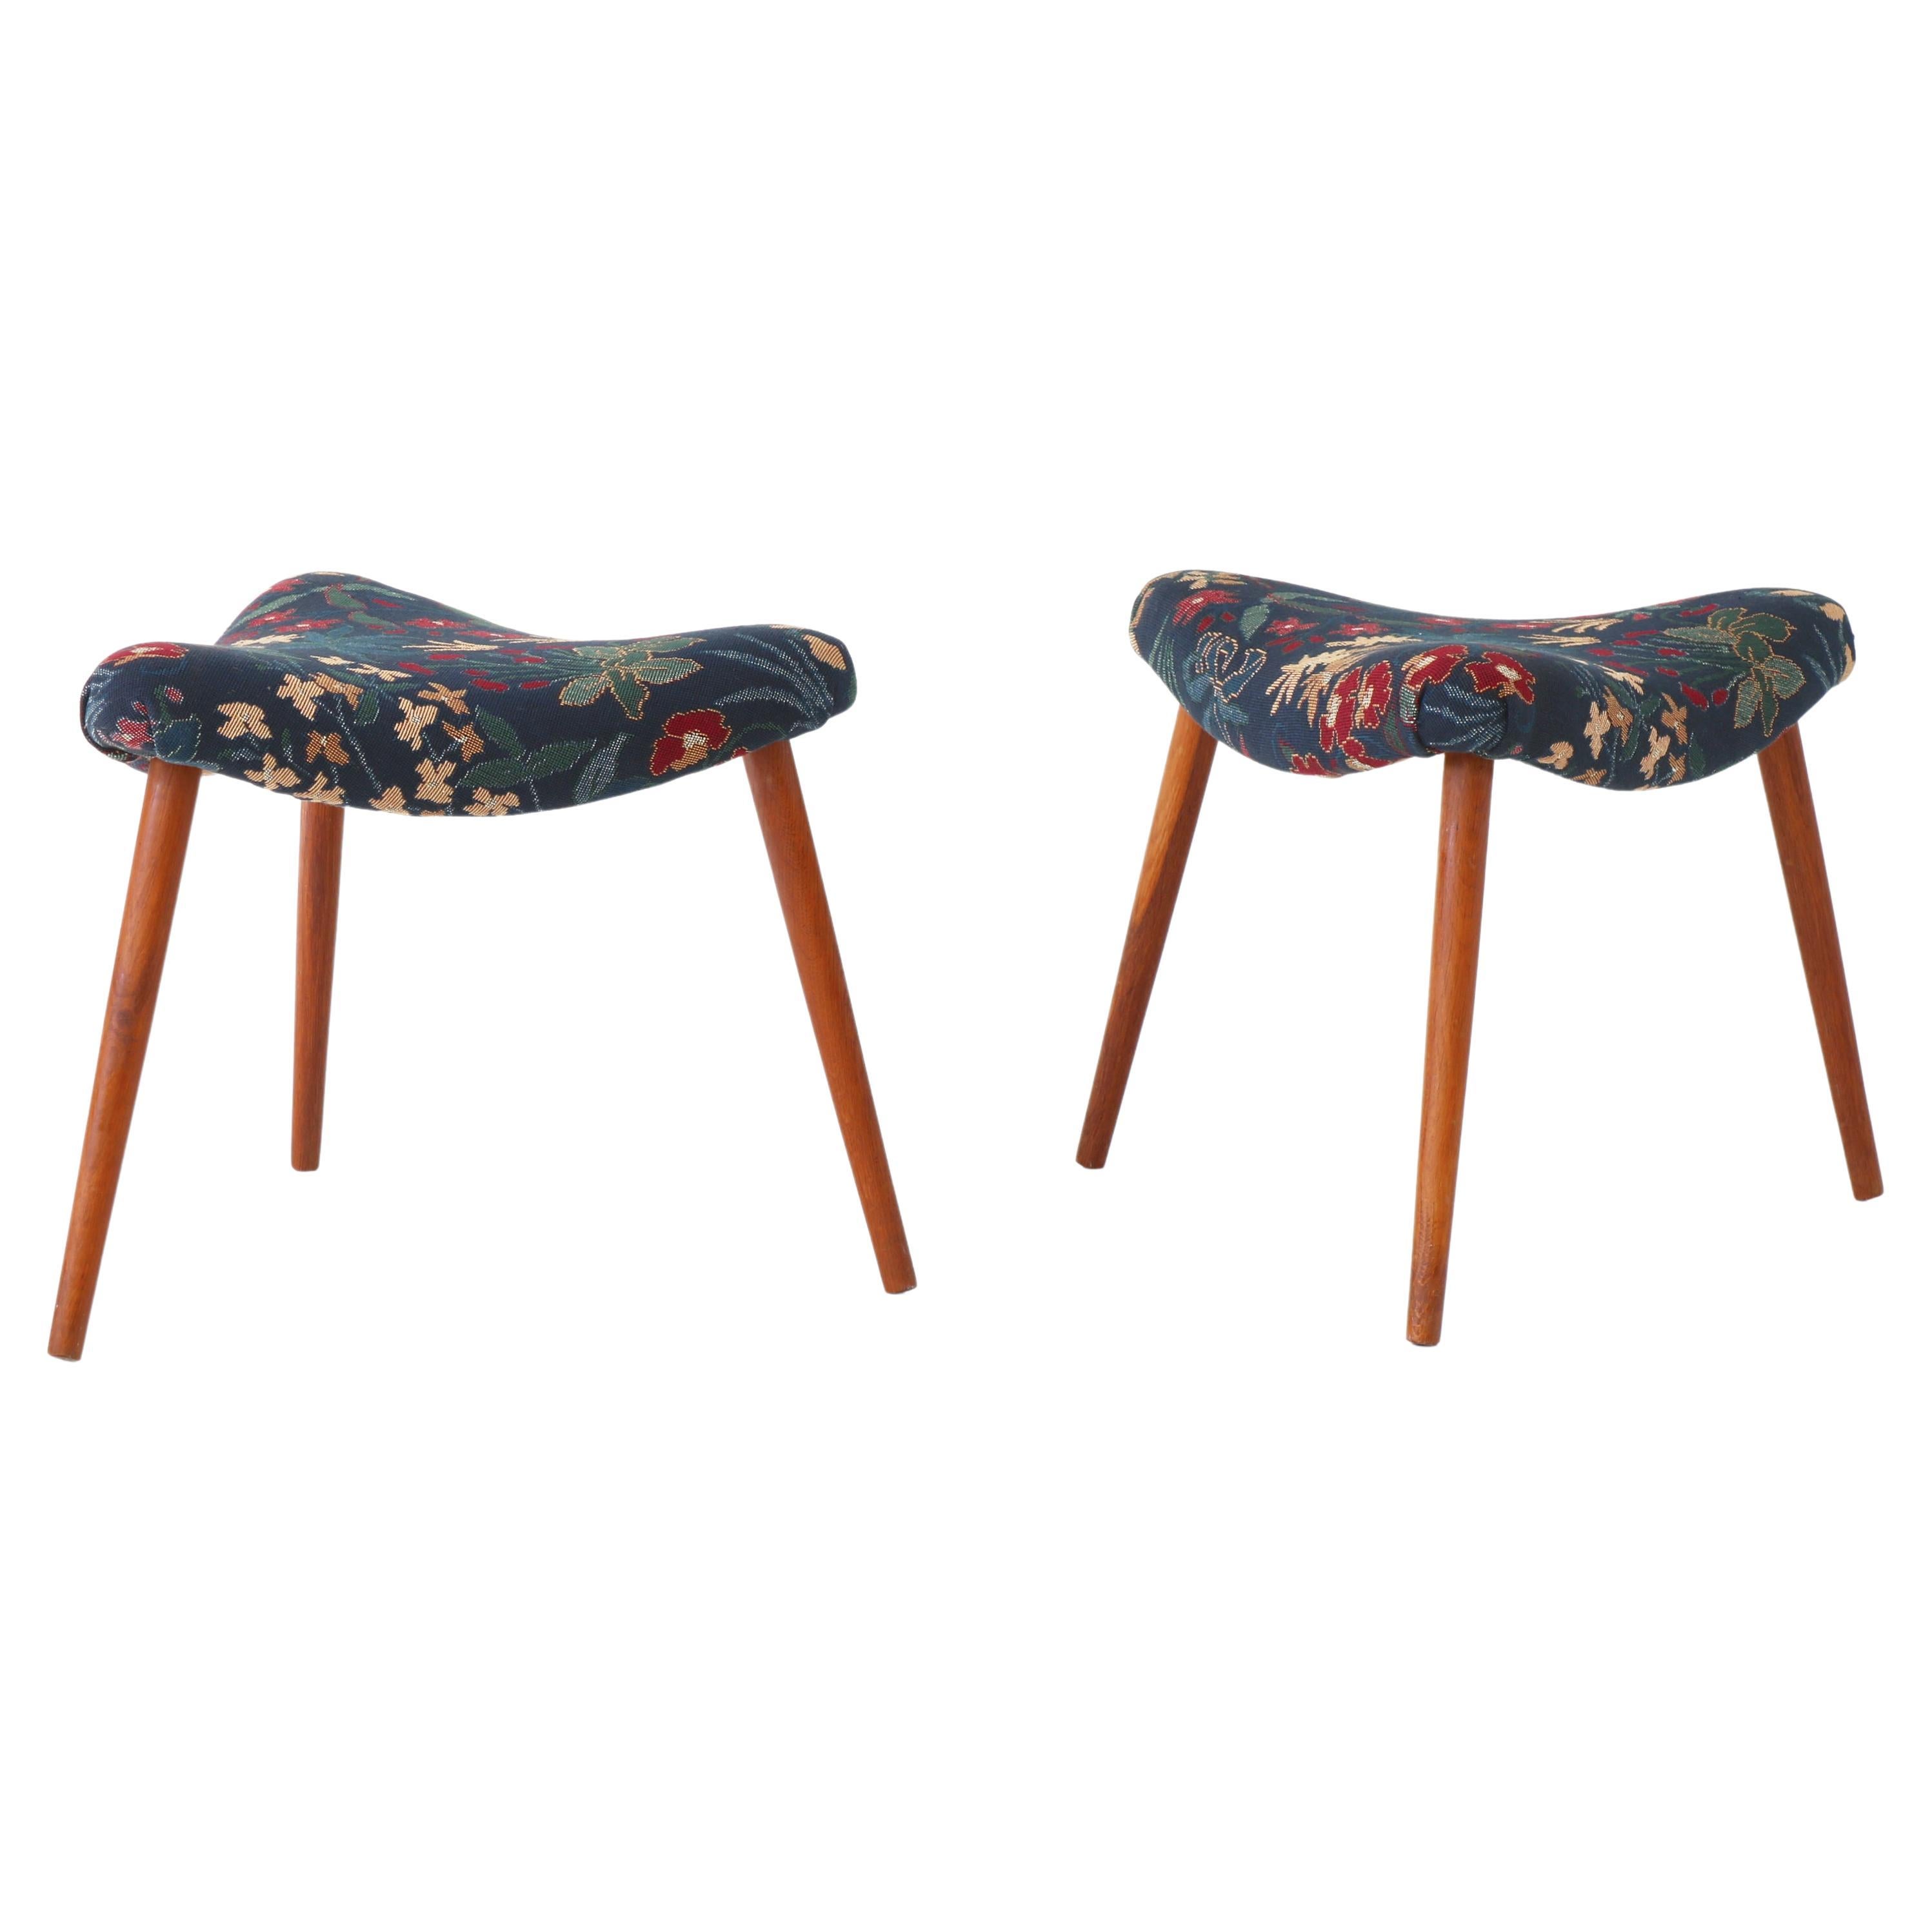 Scandinavian Modern Triangular Stools in Blue Floral Tapestry, 1950s For Sale